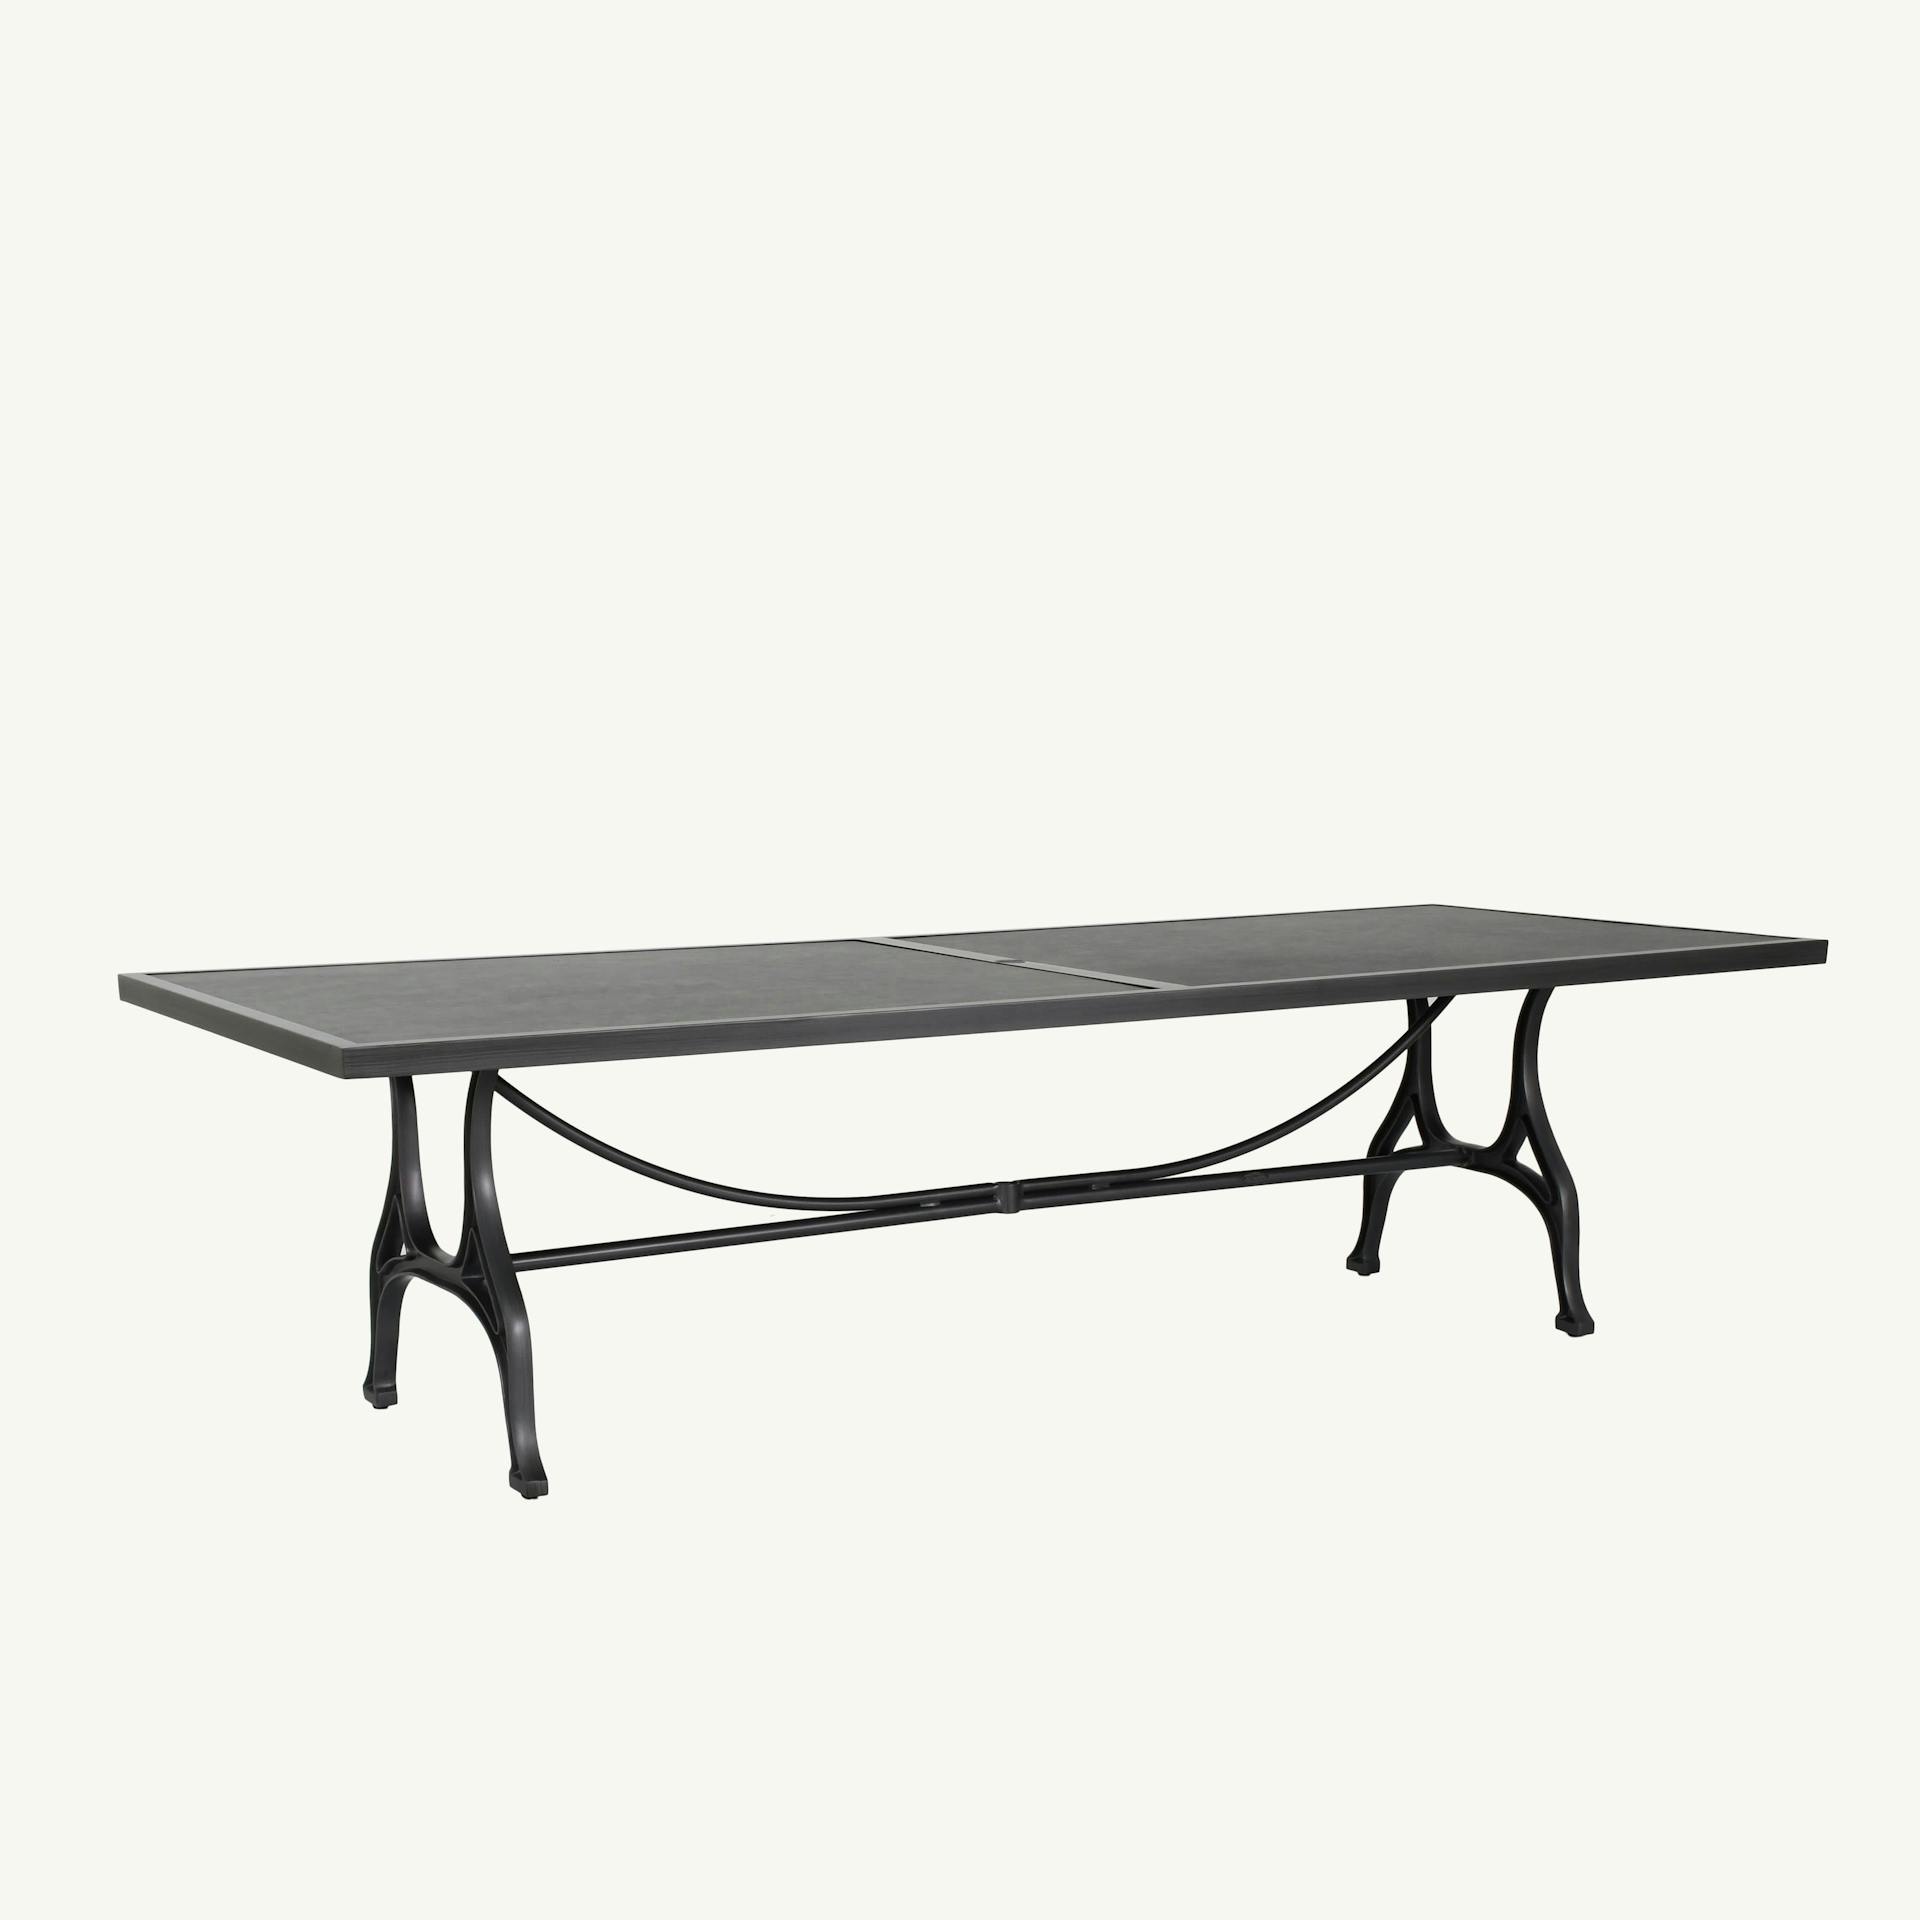 Marquis 42" X 108" Rectangular Dining Table